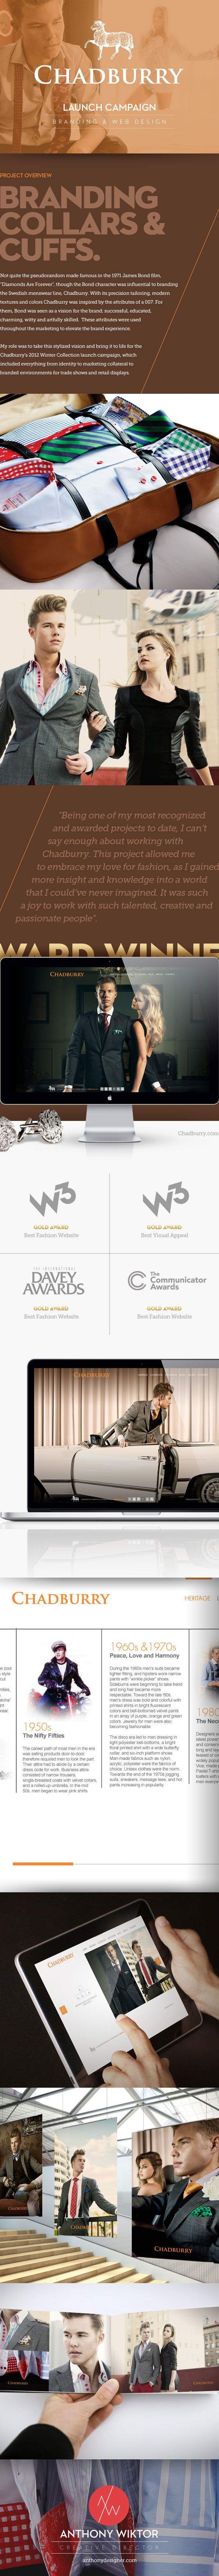 Chadburry w3 awards The Communicator awards davey awards gold award visual identity WINTER COLLECTION Menswear couture